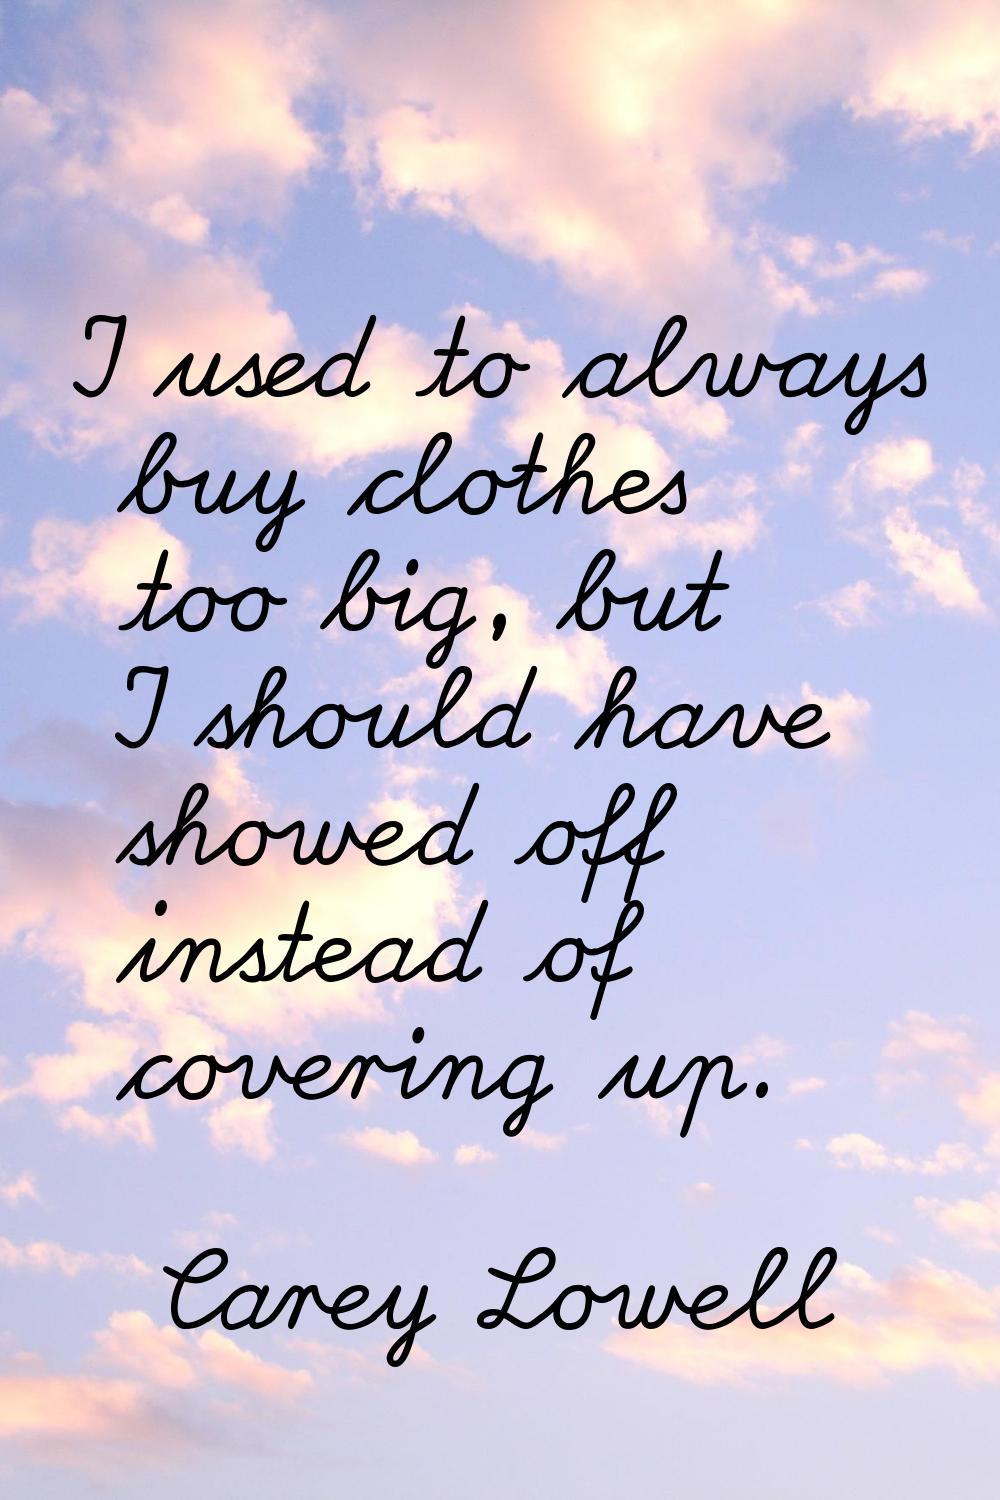 I used to always buy clothes too big, but I should have showed off instead of covering up.